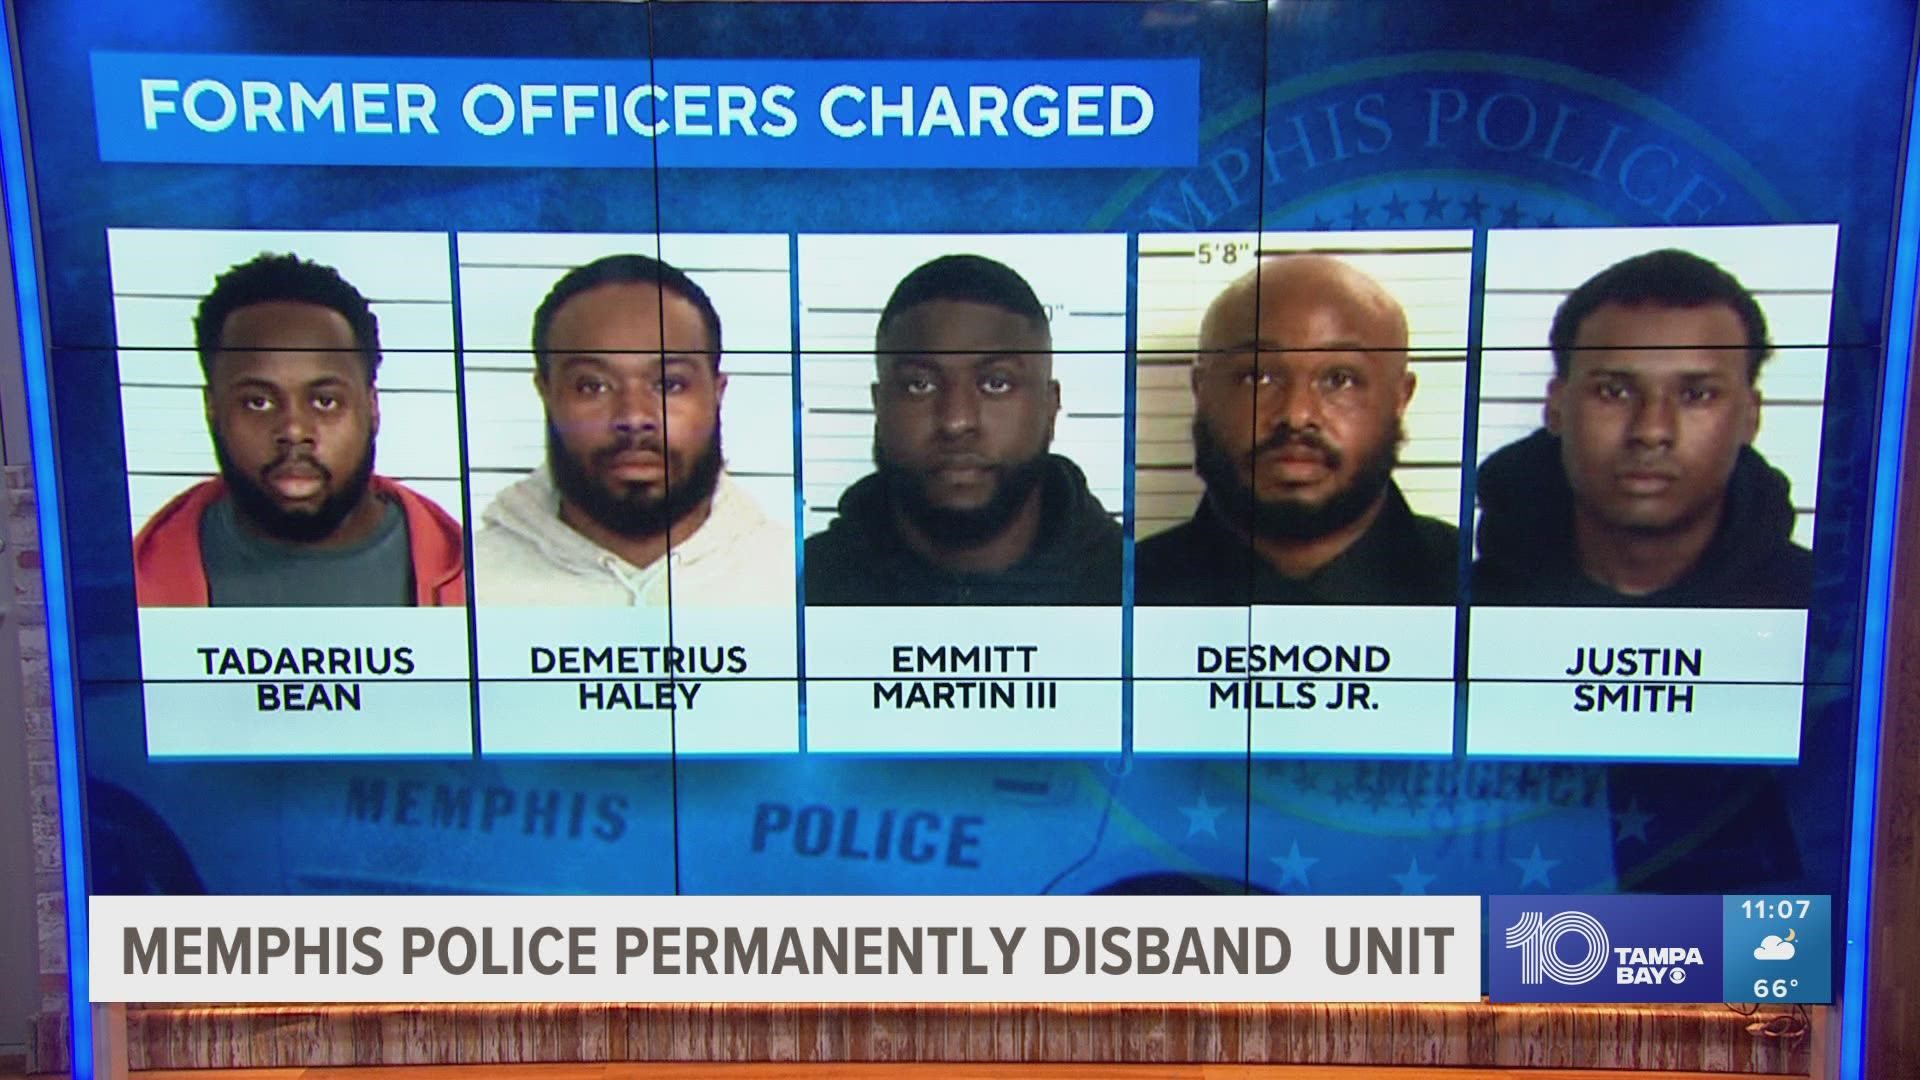 Memphis Police announced the deactivation Saturday, saying the officers assigned to the unit agreed with the move.